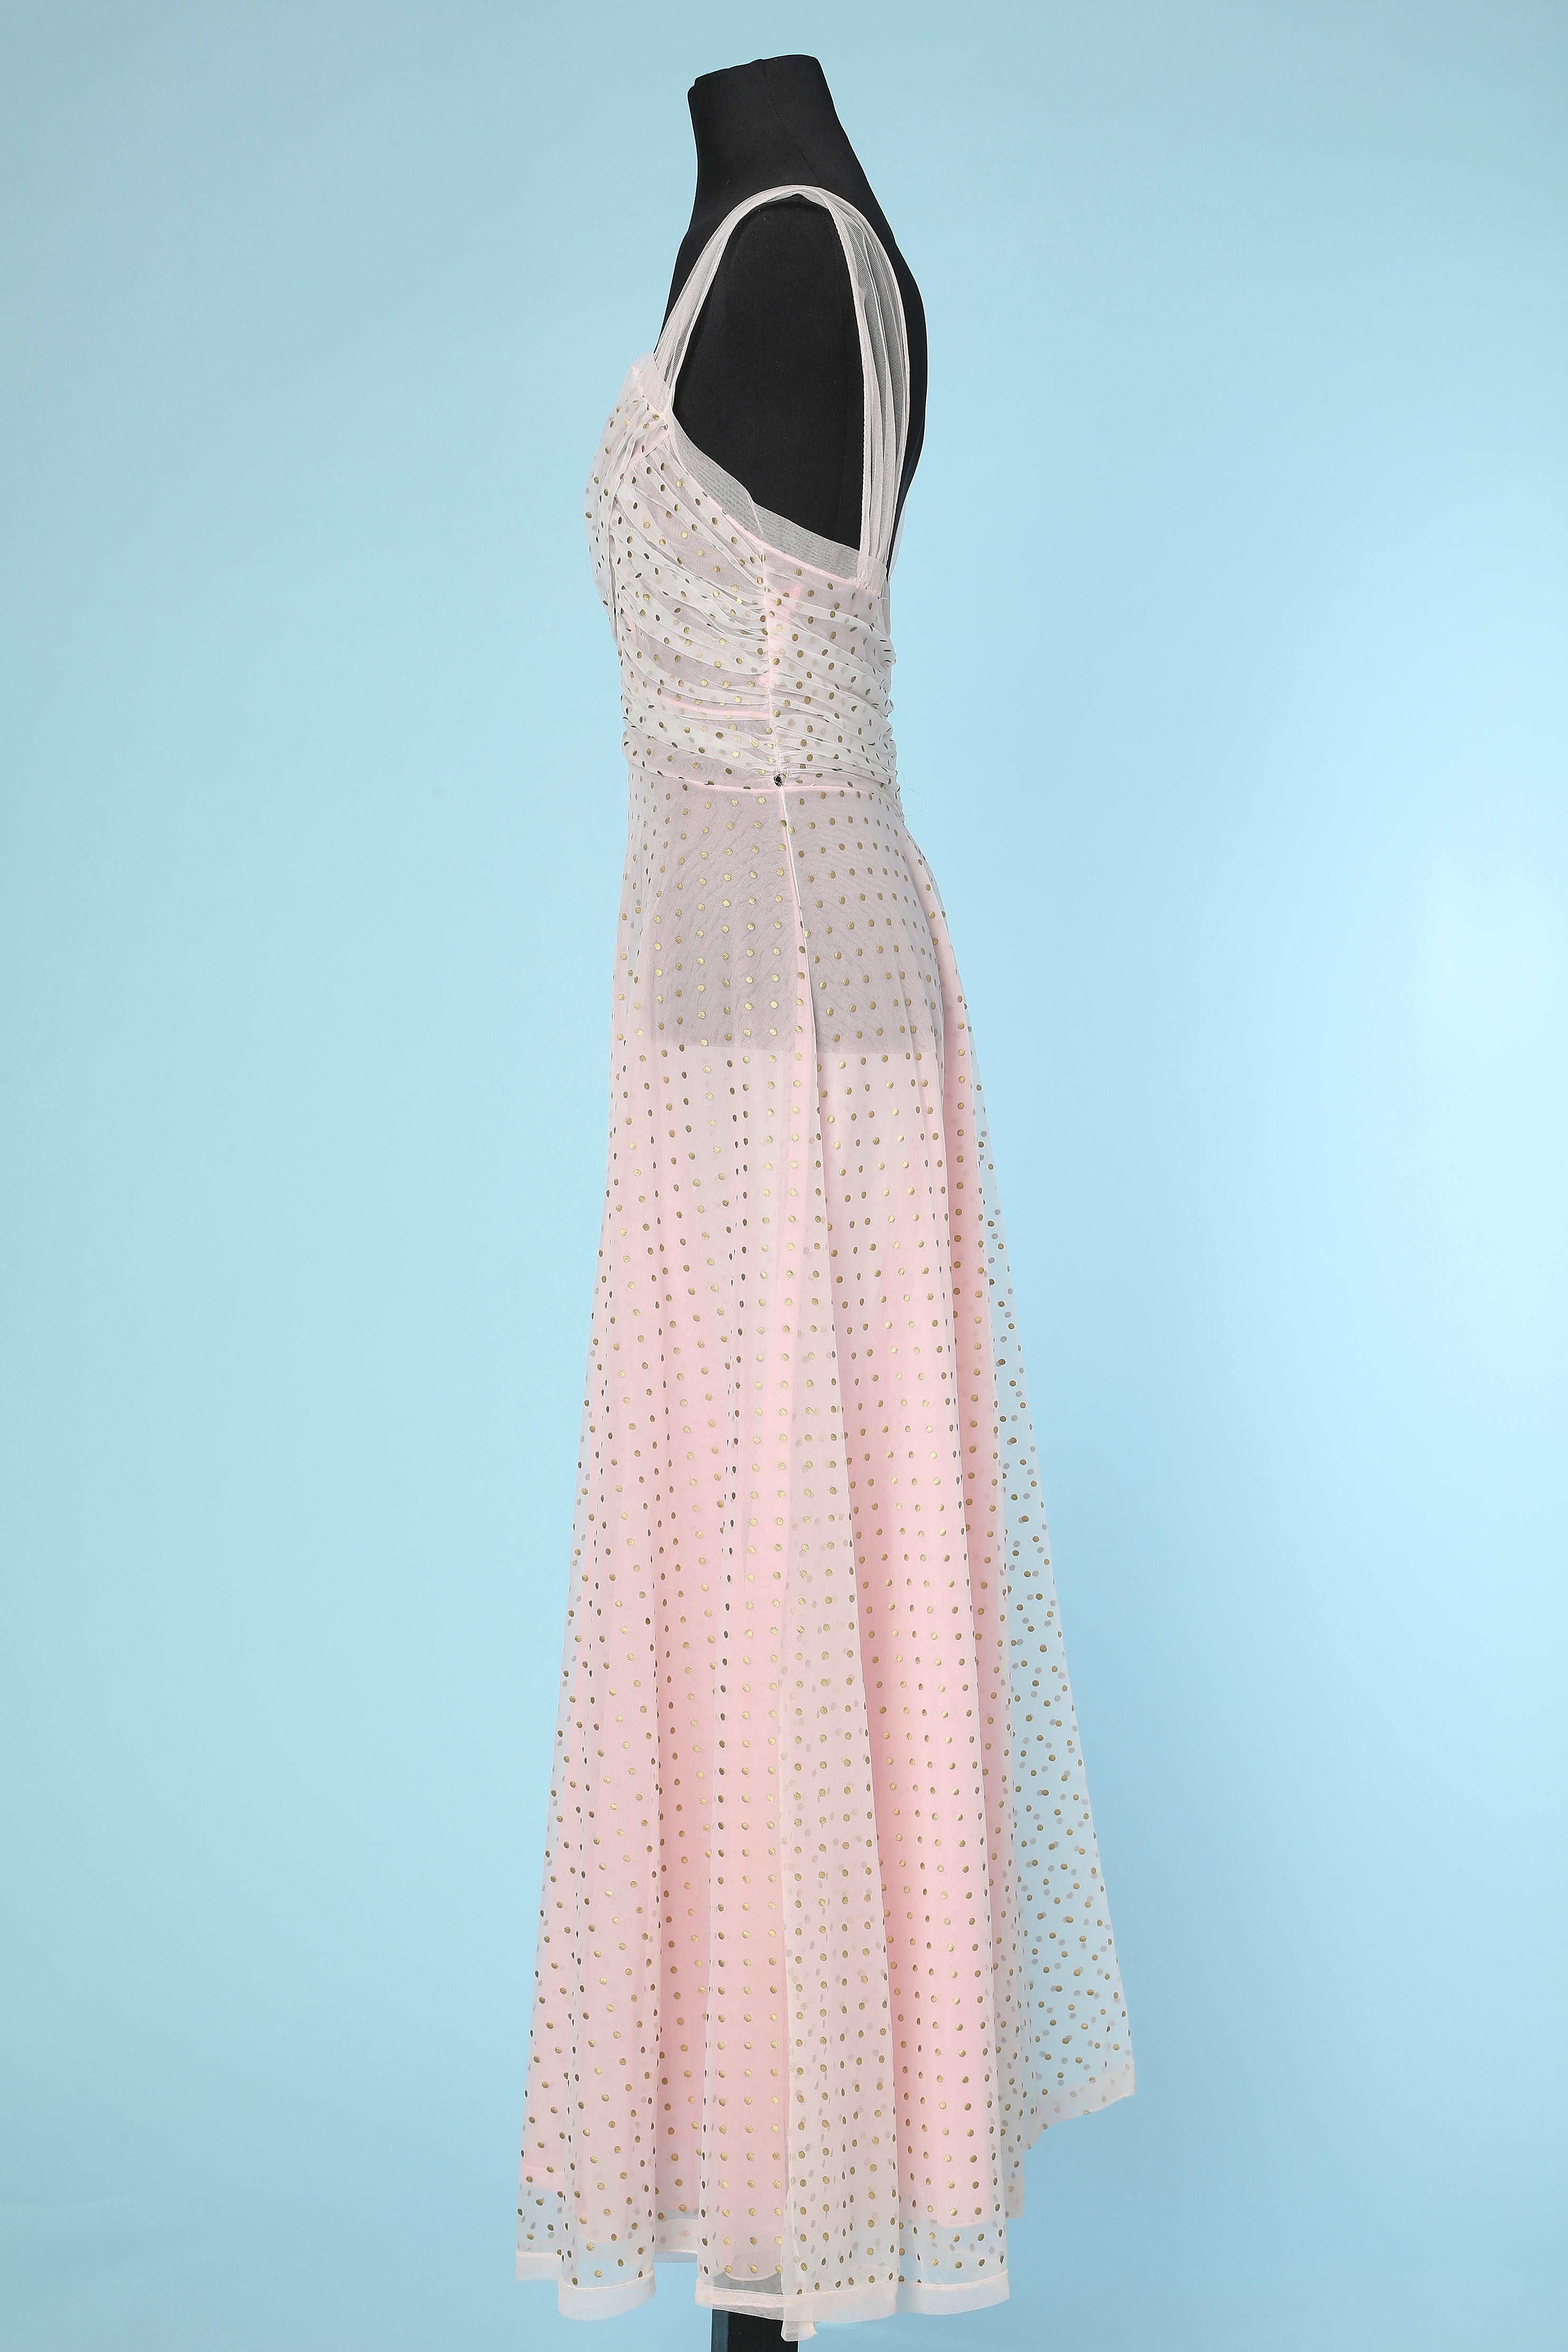 Robe and night-gown in pink nylon and tulle with gold Polka dots Schiaparelli  For Sale 4